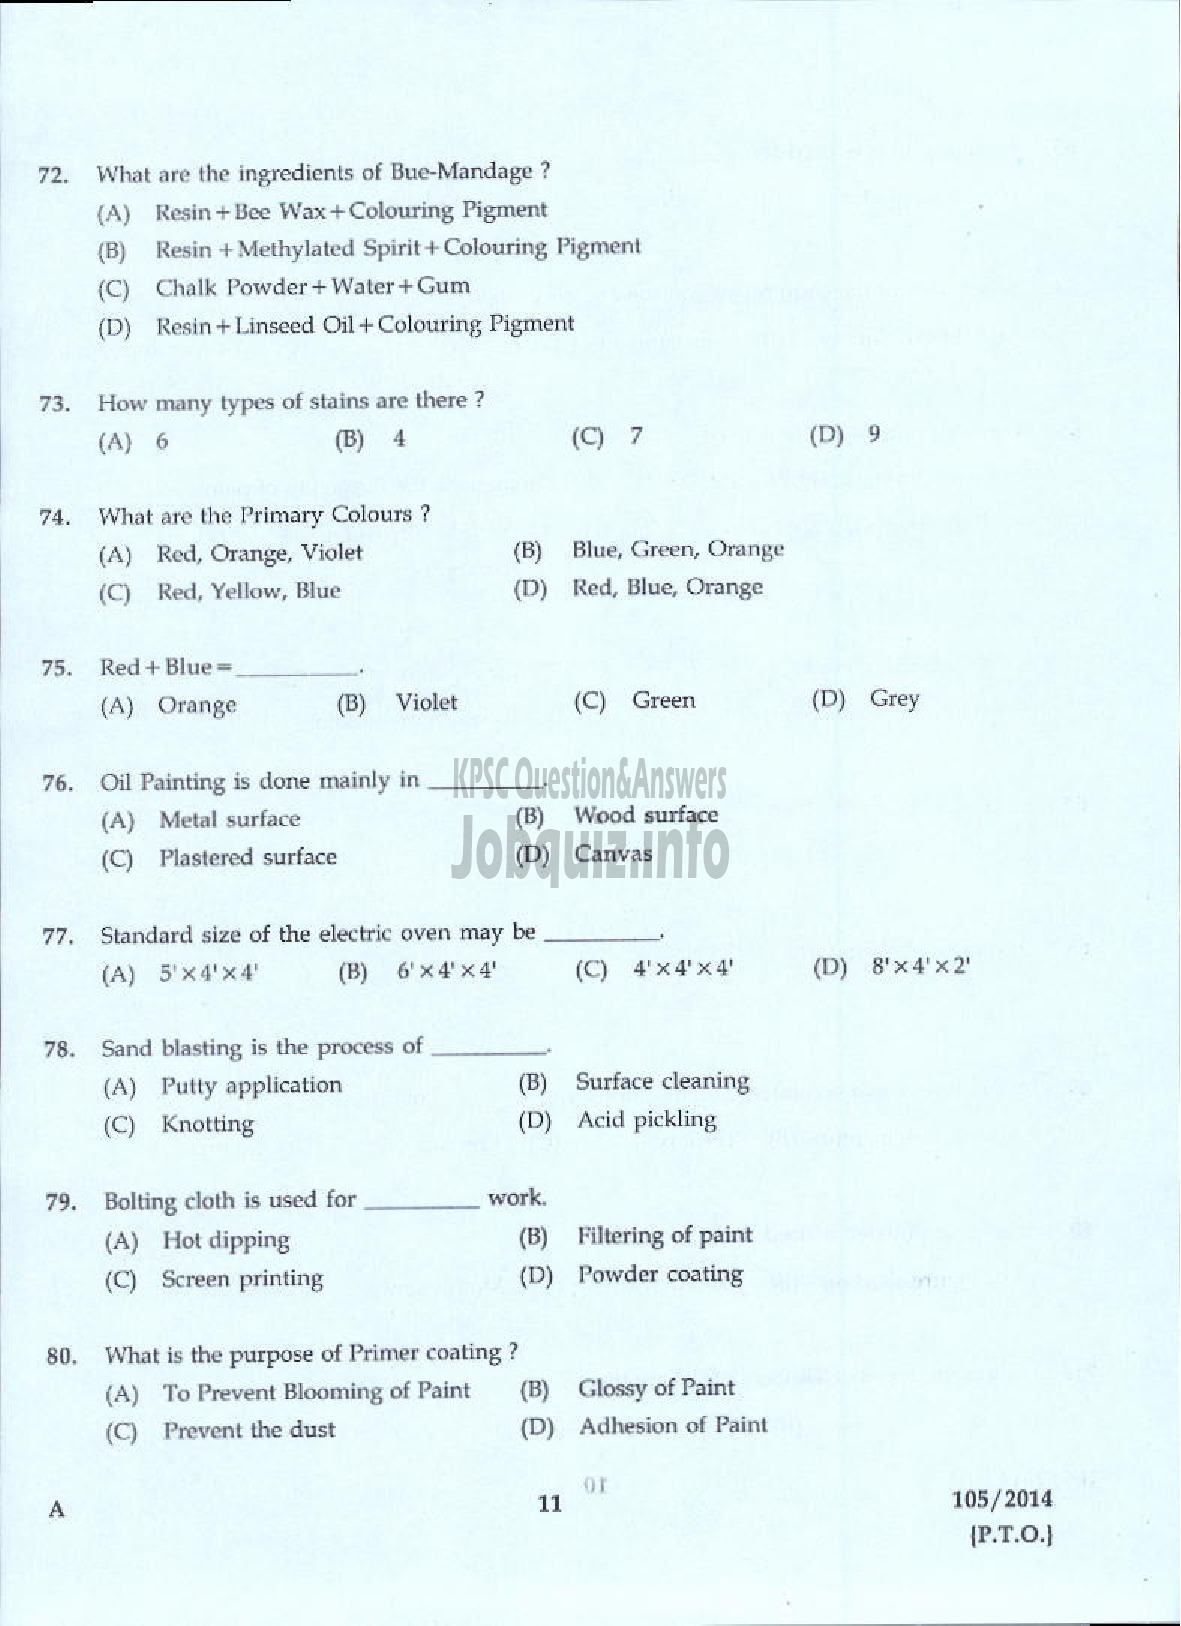 Kerala PSC Question Paper - PAINTER KERALA AGRO MACHINERY CORPORATION LIMITED-9